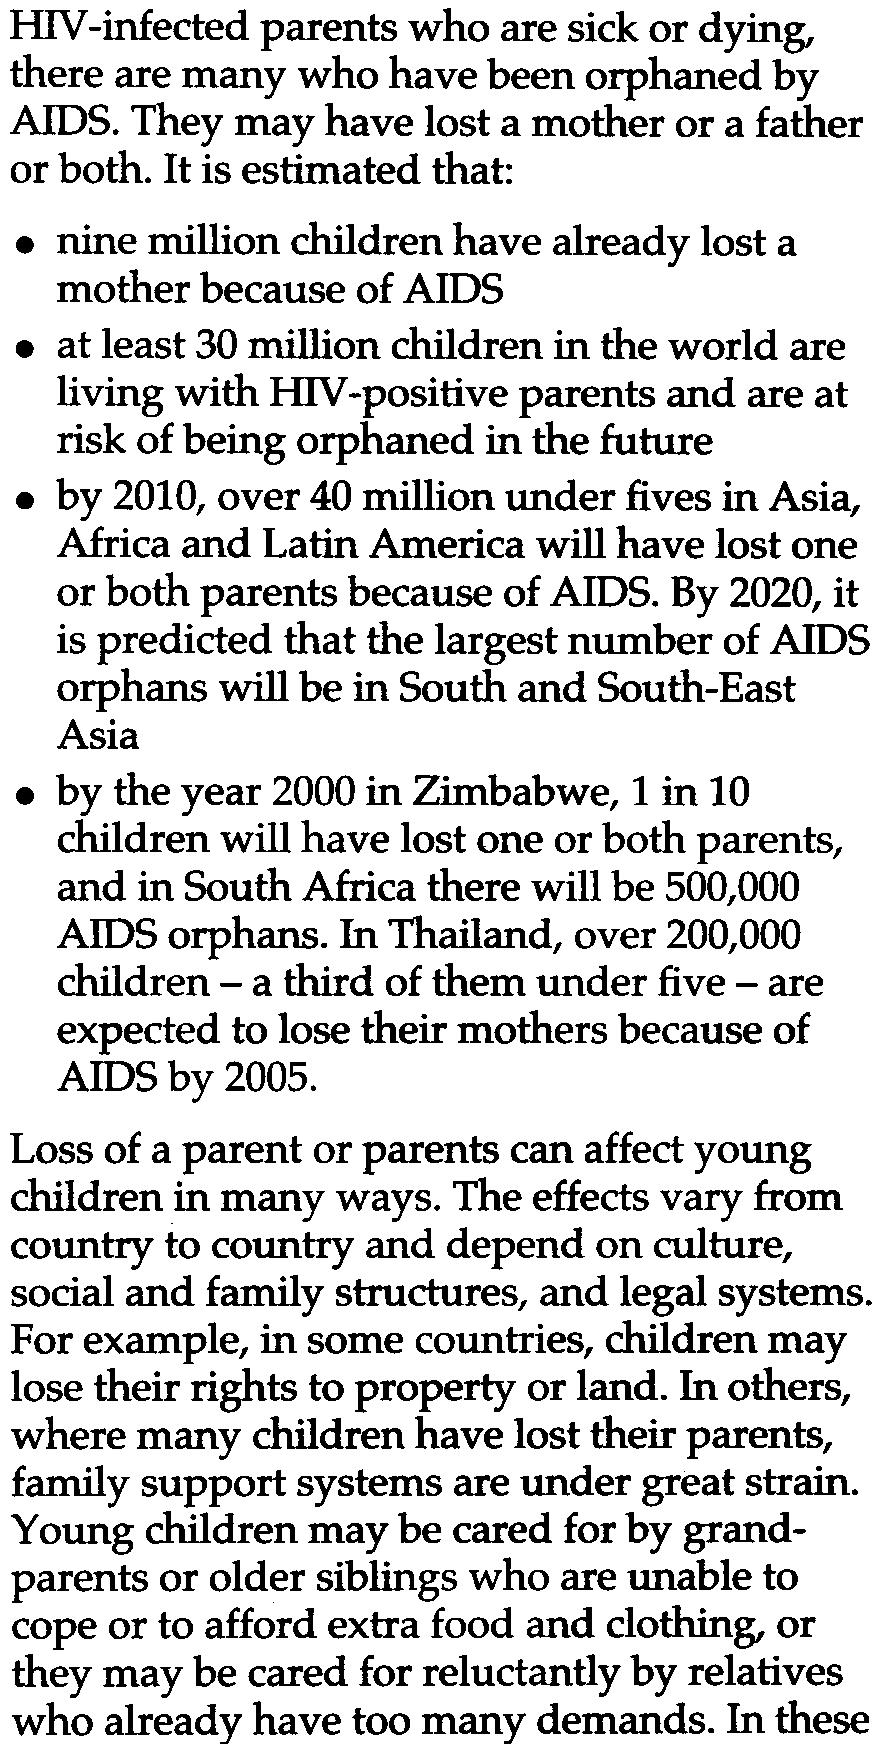 By 2020, it is predicted that the largest number of AIDS orphans will be in South and South-East Asia.